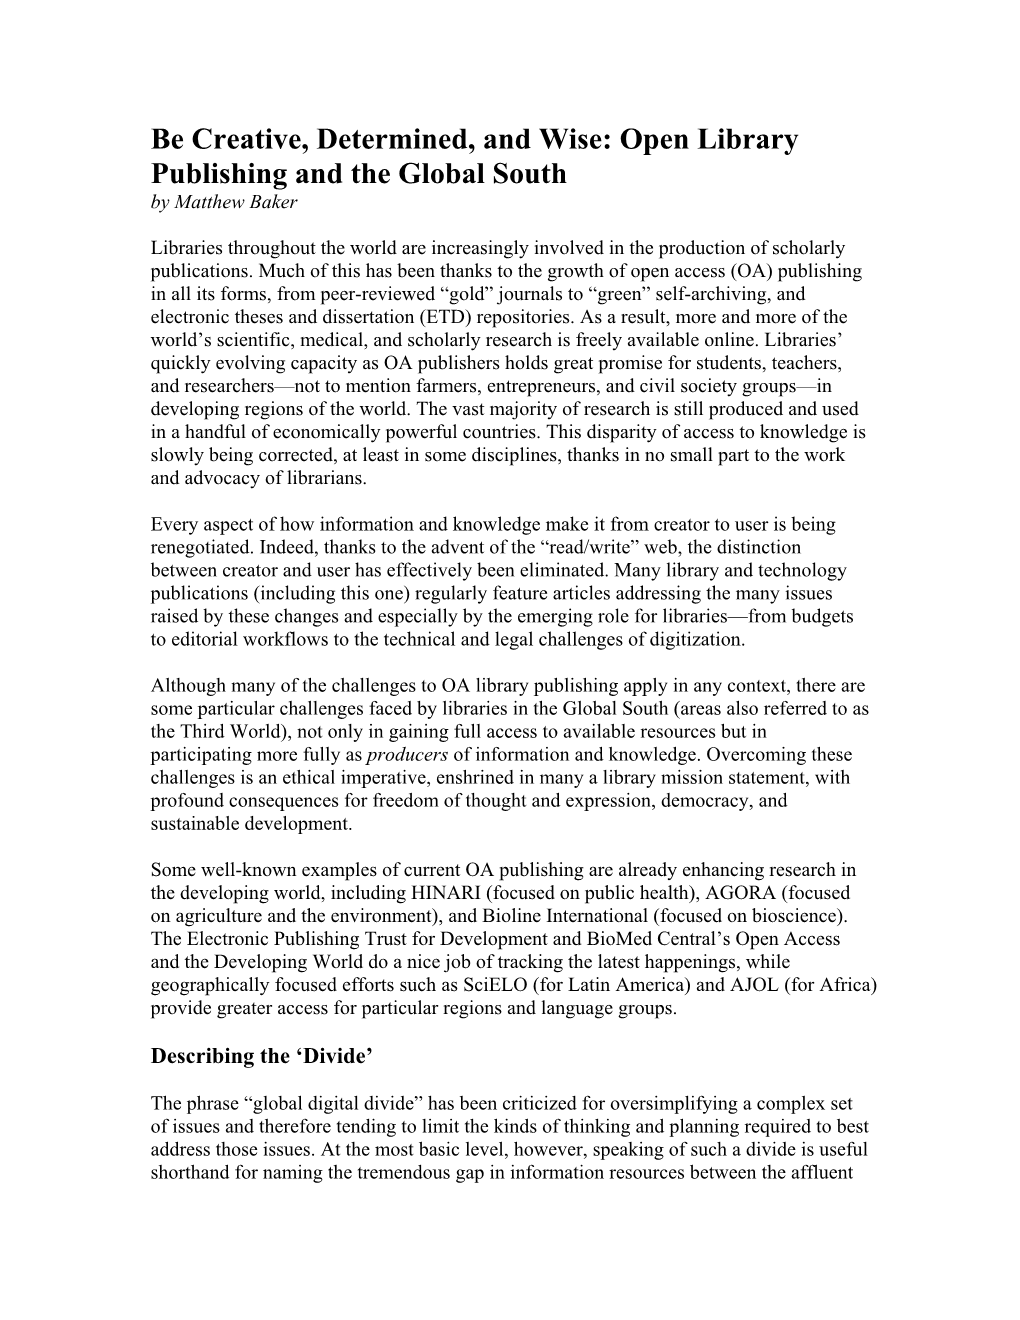 Open Library Publishing and the Global South by Matthew Baker